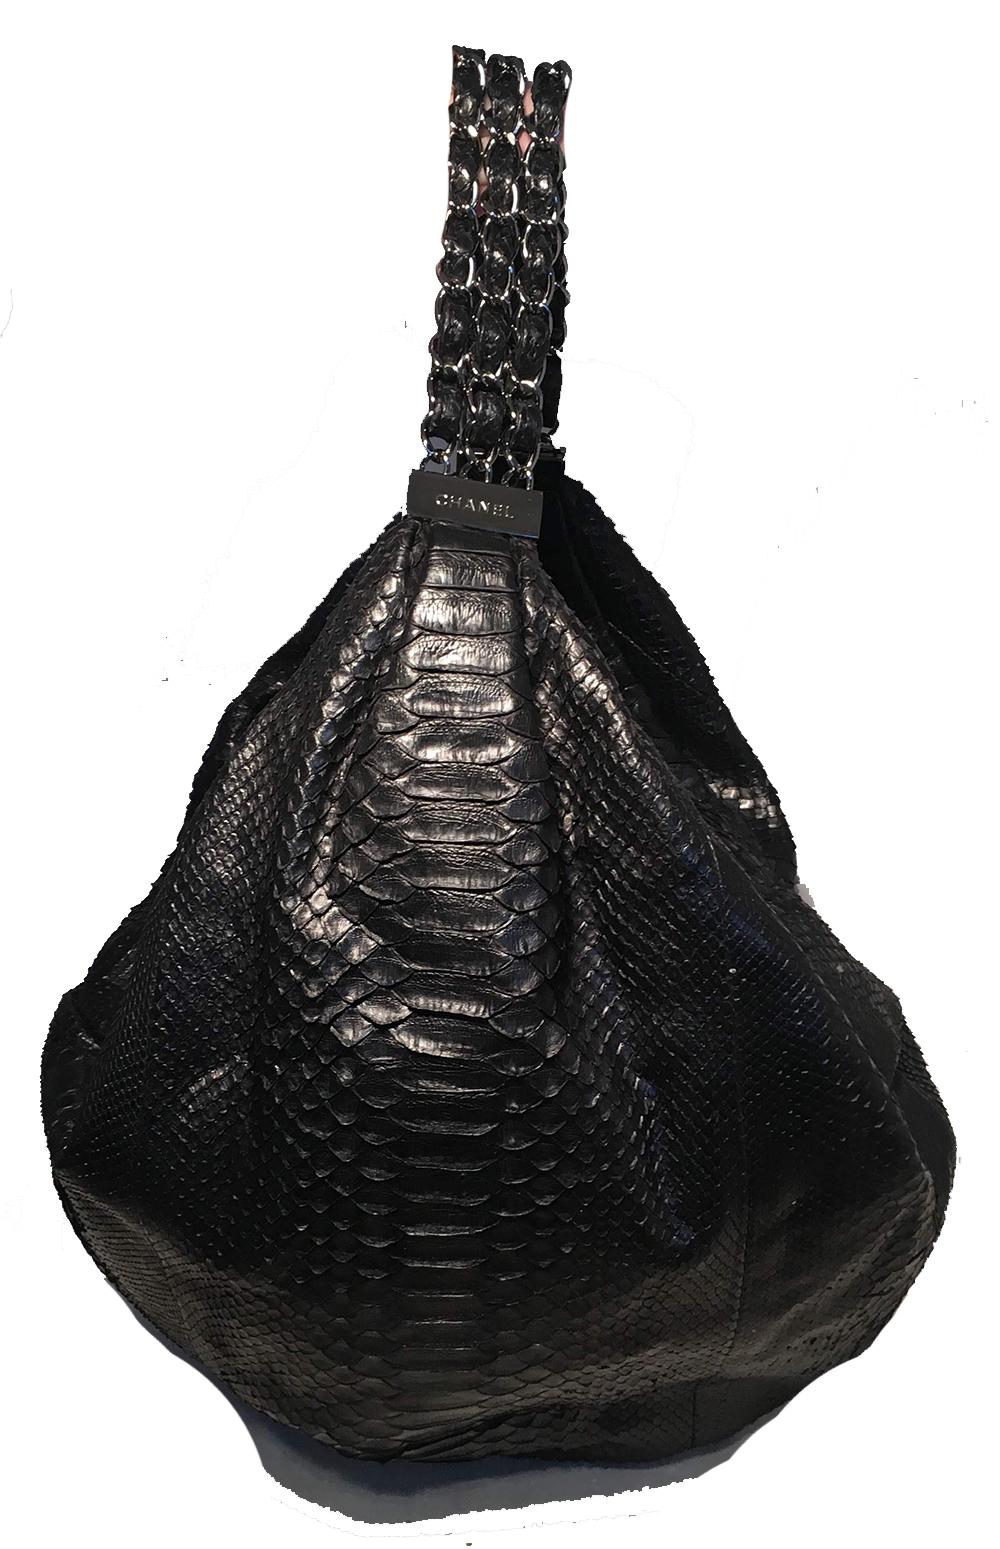 Chanel Runway black python snakeskin hobo shoulder bag in excellent condition. Black python snakeskin exterior trimmed with silver hardware and a triple row of chain and leather woven handle. Top zipper closure opens to a grey satin lined interior